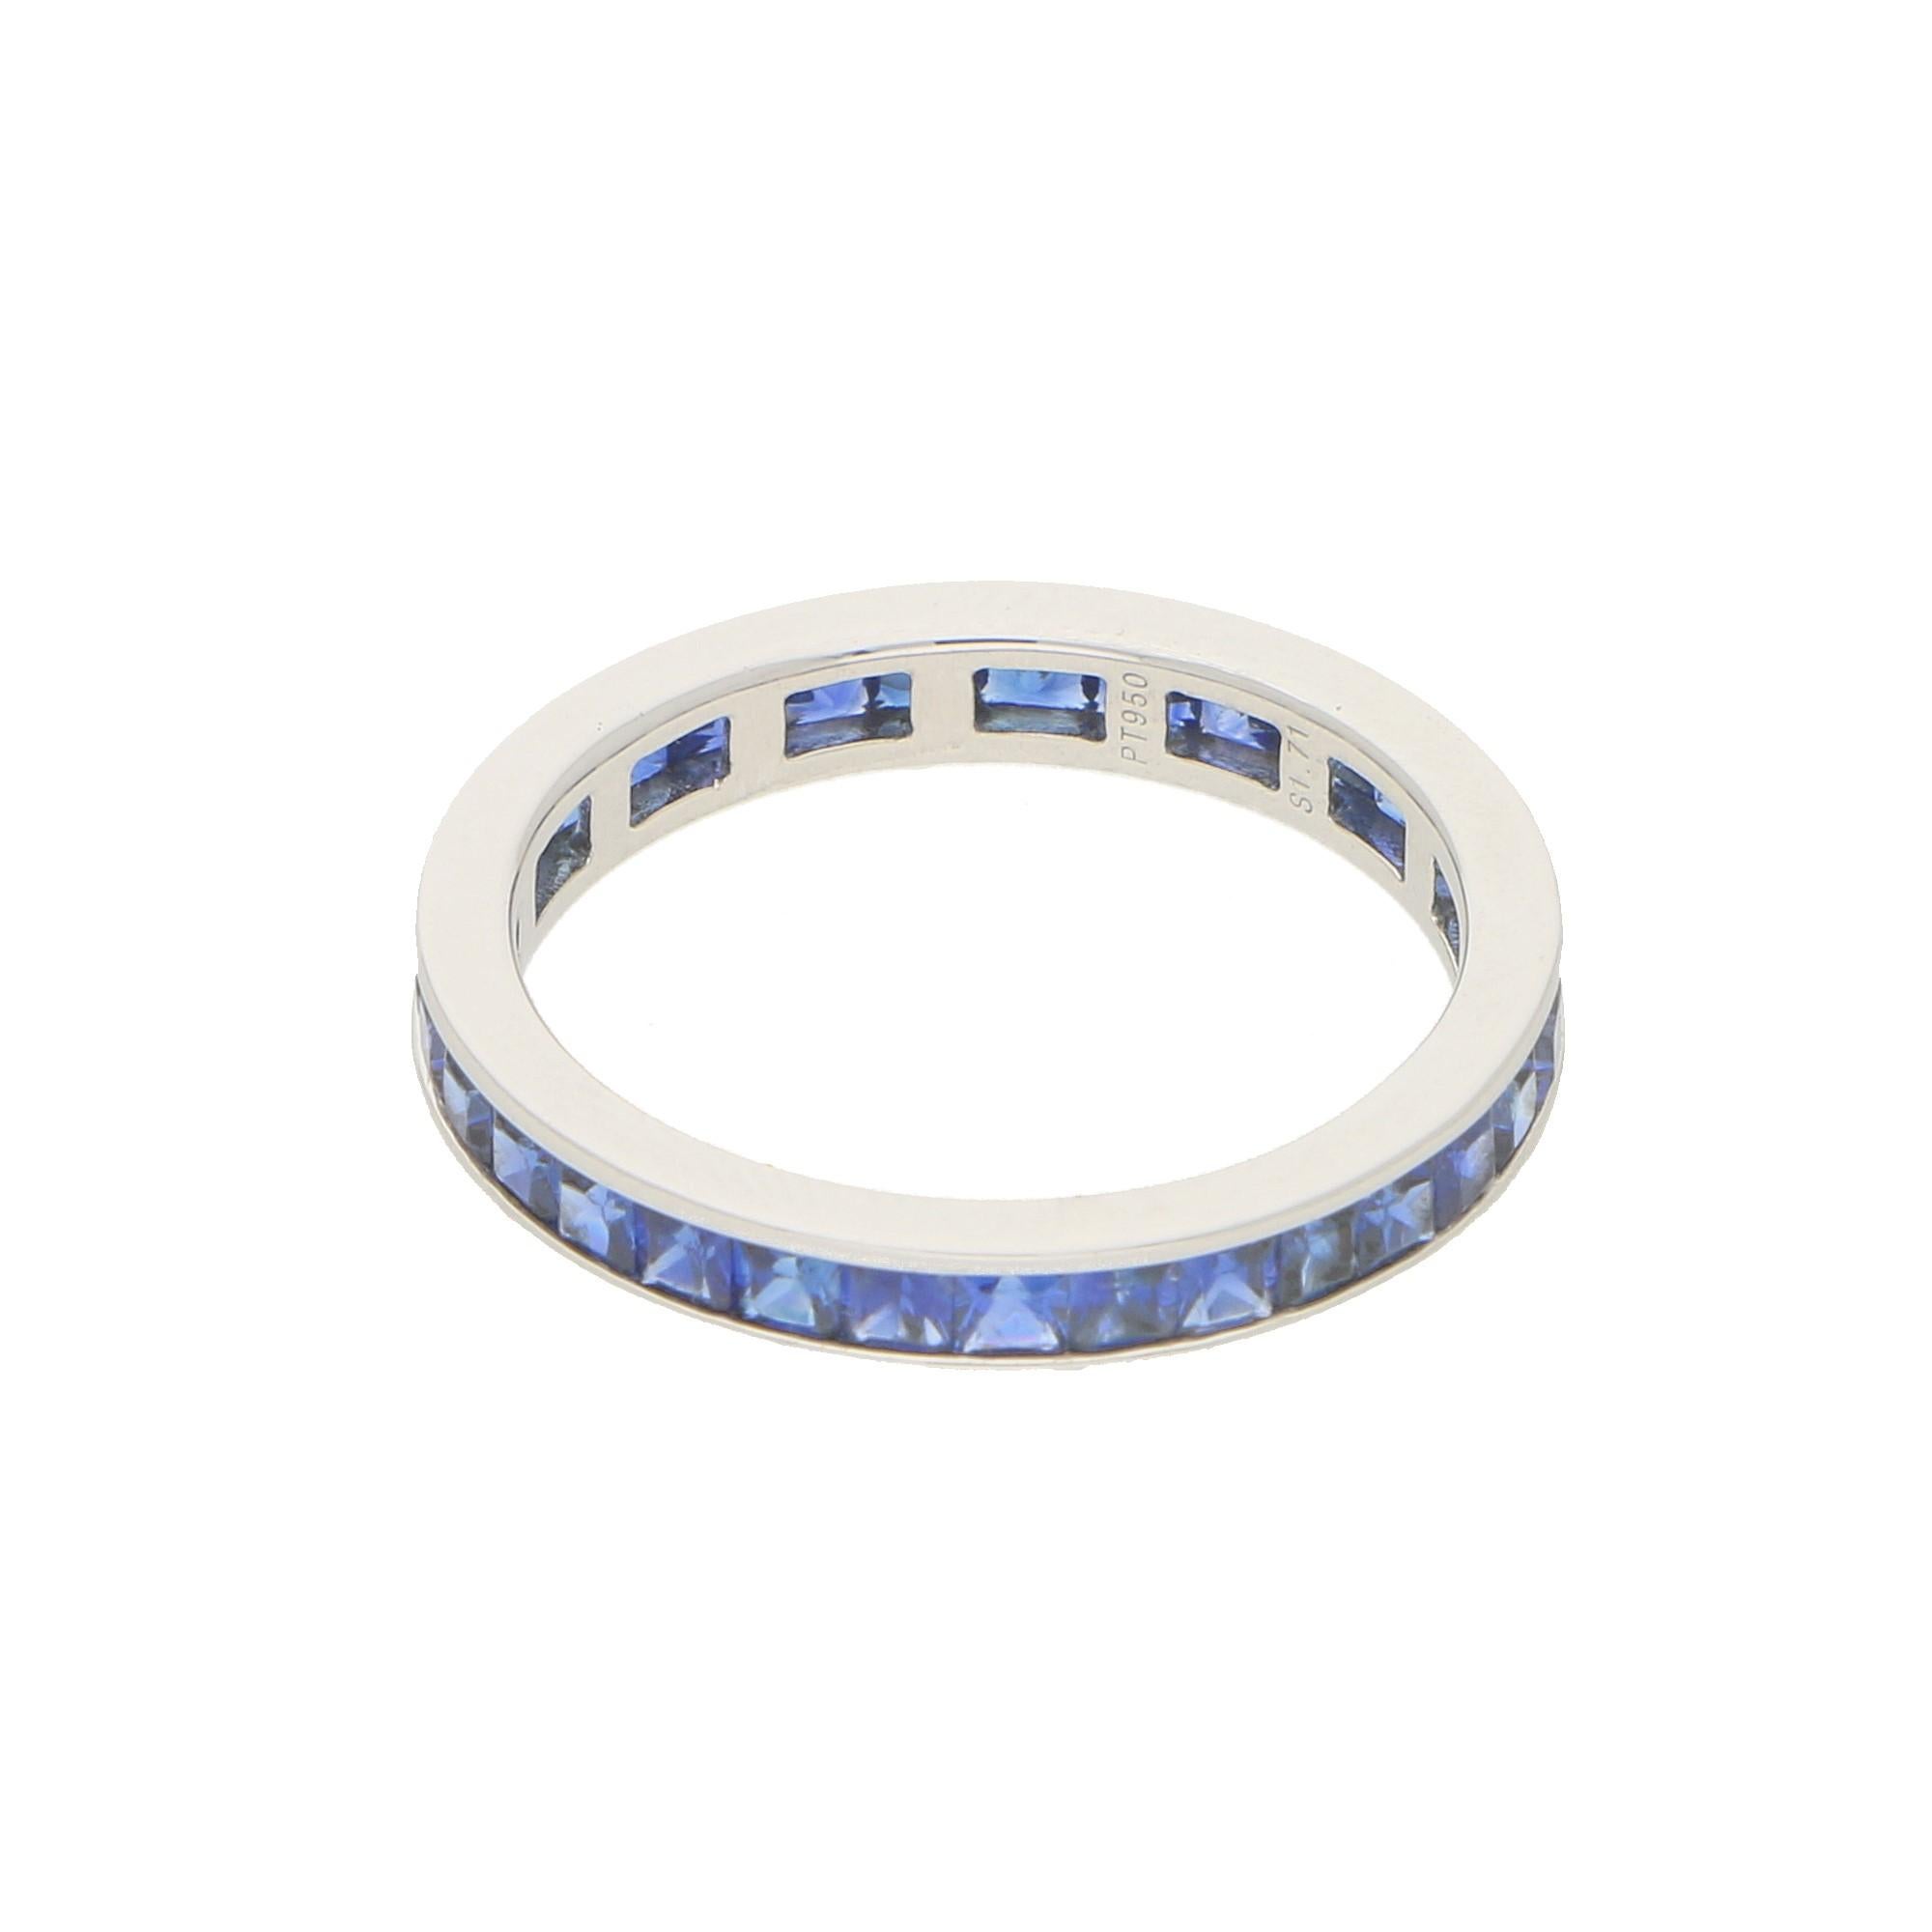 A beautiful sapphire full eternity ring set in platinum. The ring is solely set with vibrant royal blue coloured sapphires which are all channel set in a 3mm flat sided platinum shank.

There is a total of 31 sapphires having a combined weight of